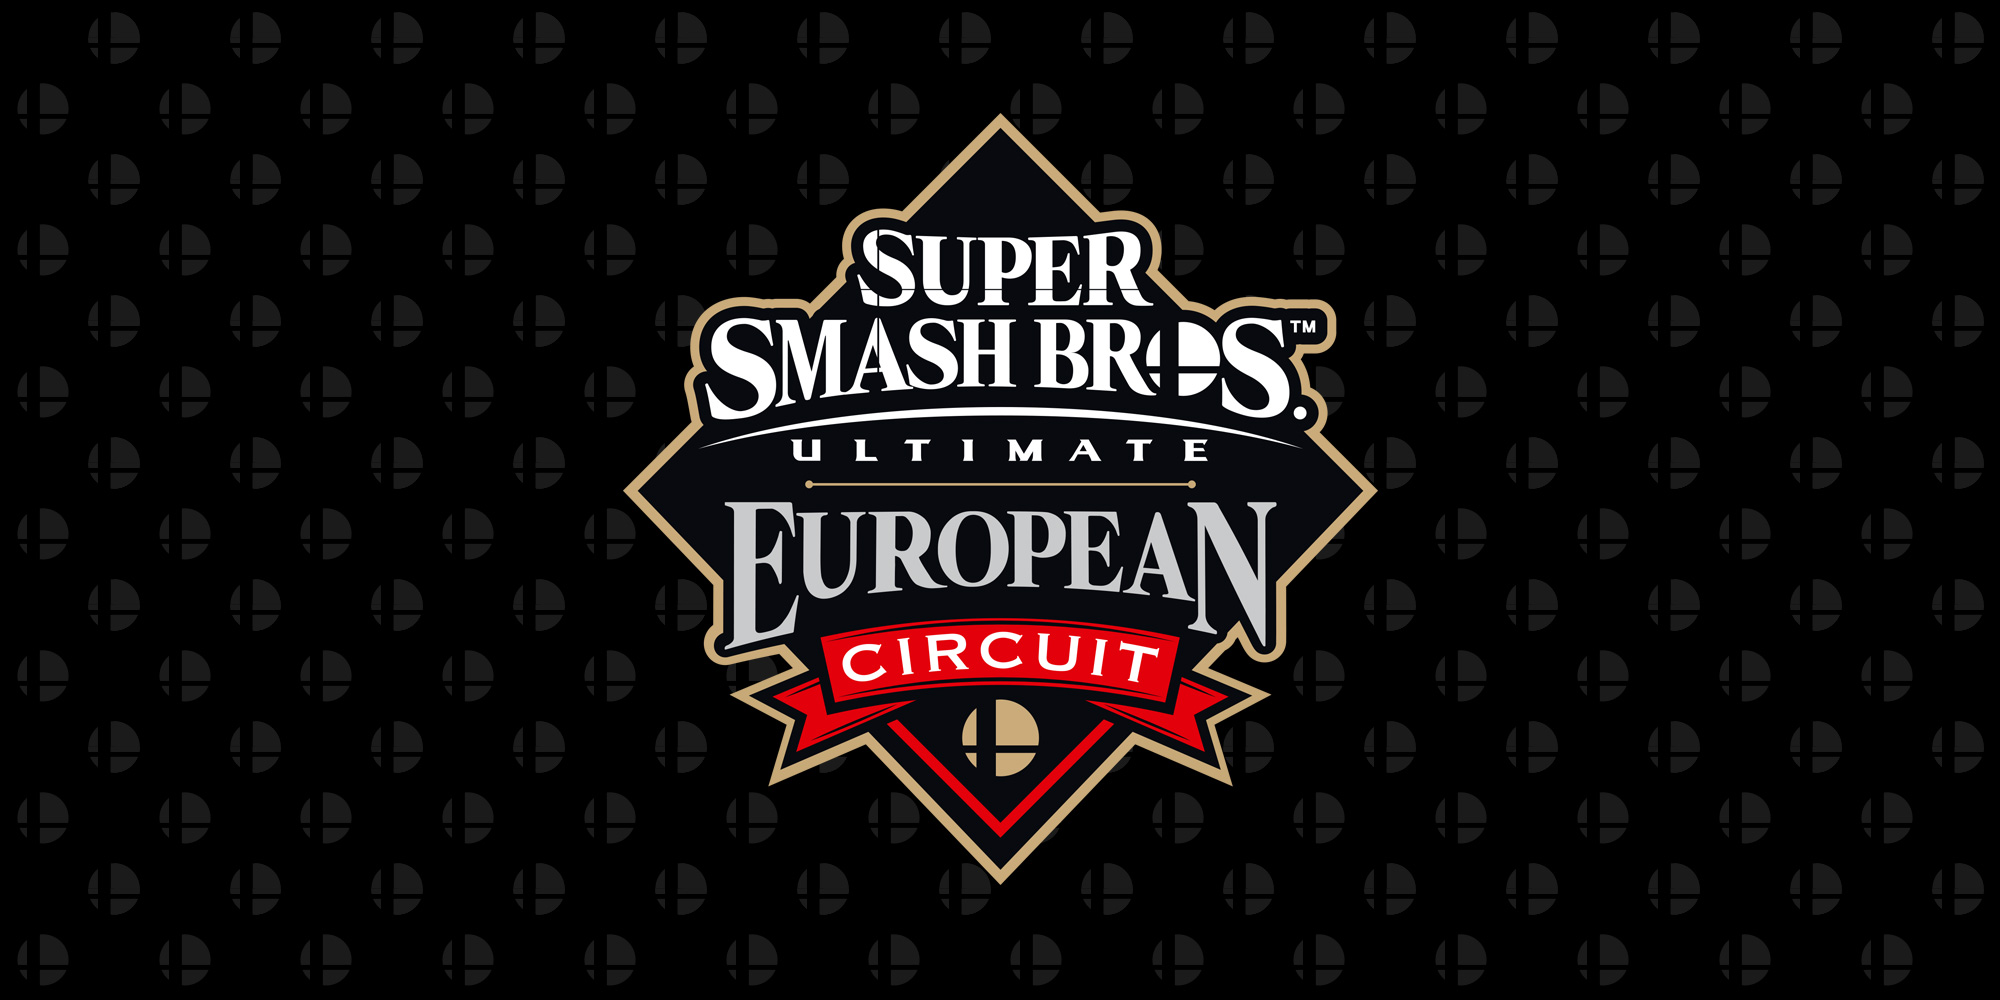 Qualify for the Super Smash Bros. Ultimate European Circuit Grand Finals via the Last Chance Qualifier, running June 12th-13th at DreamHack Summer!